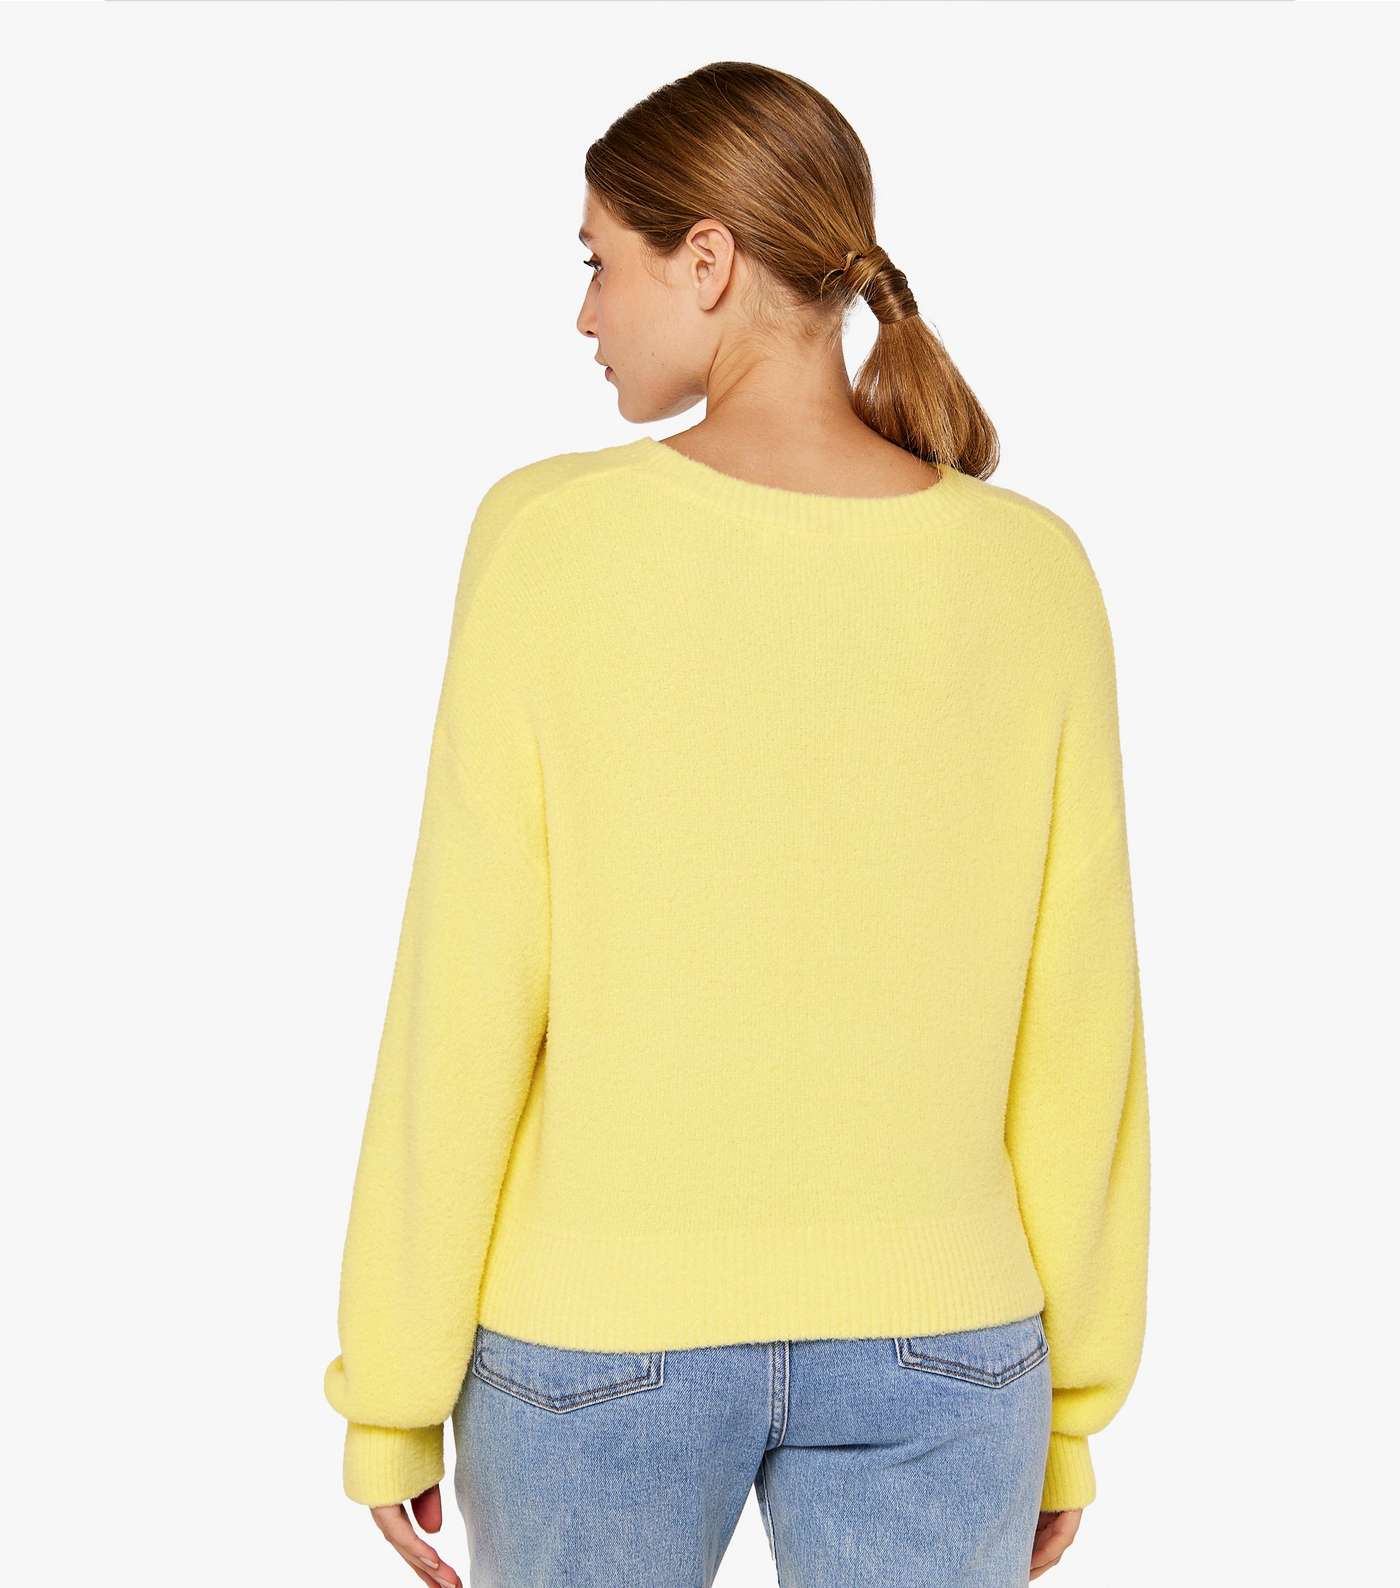 Apricot Yellow Soft Knit Crew Neck Crop Jumper Image 3